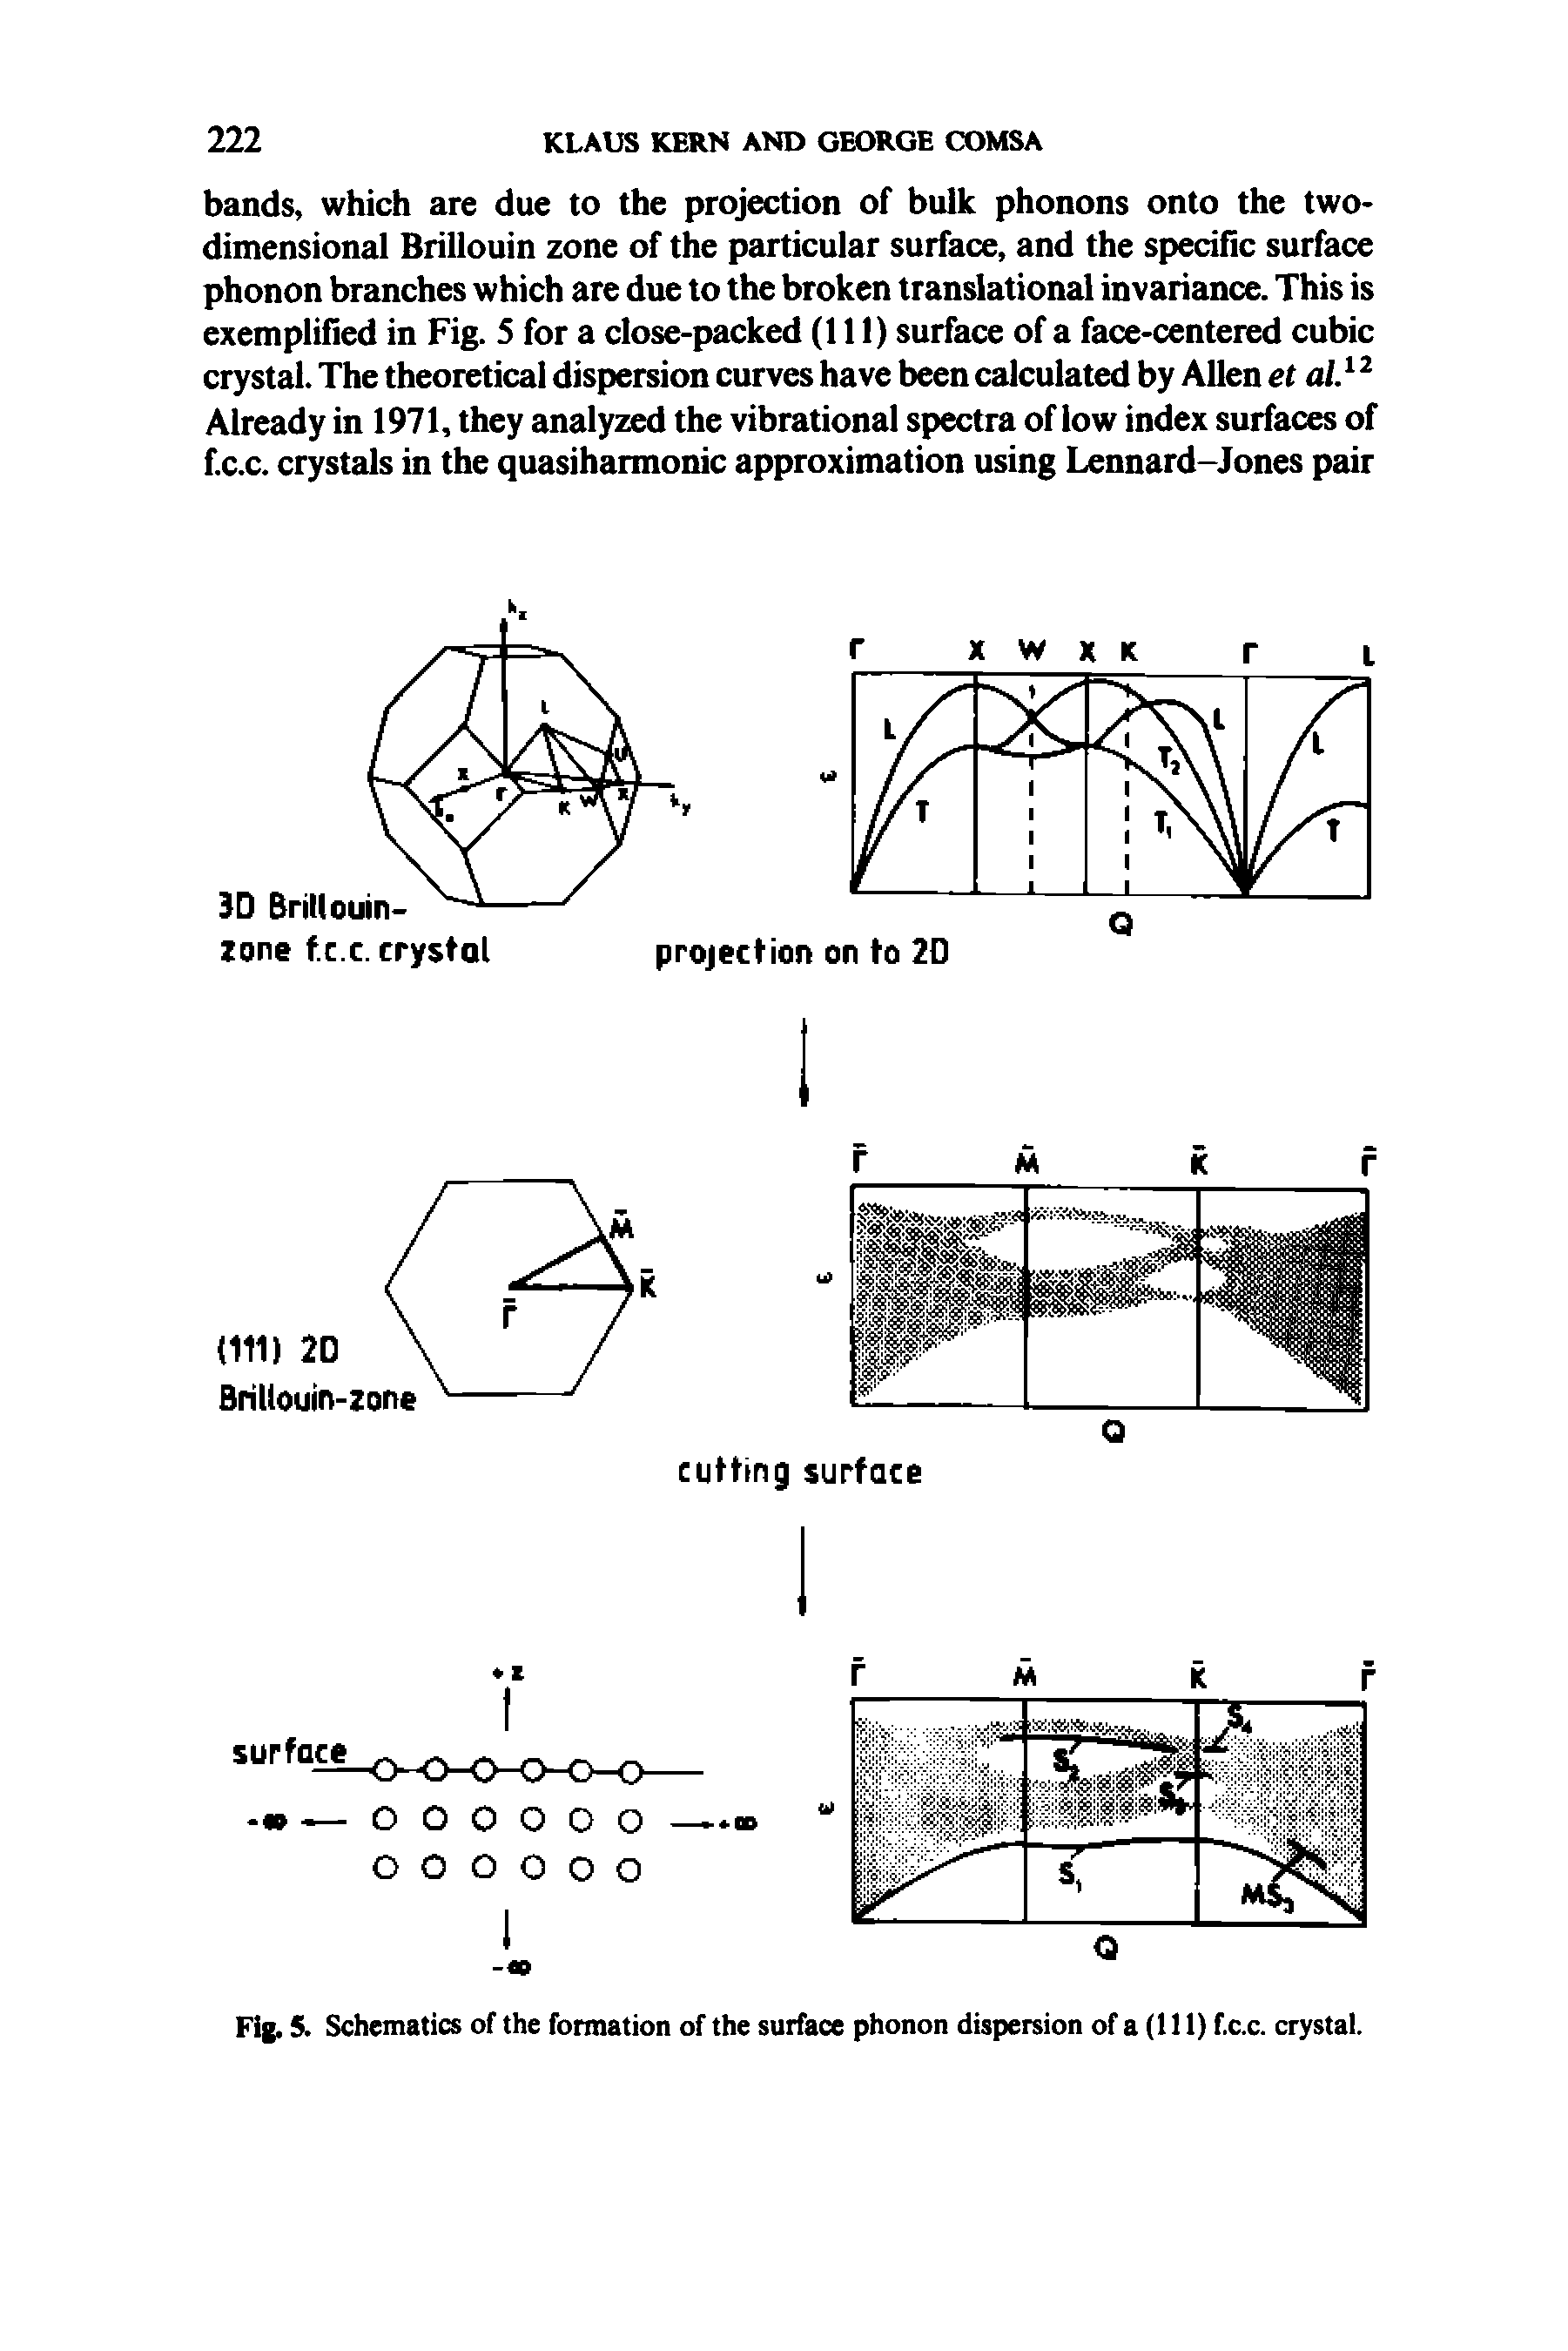 Fig. 5. Schematics of the formation of the surface phonon dispersion of a (111) f.c.c. crystal.